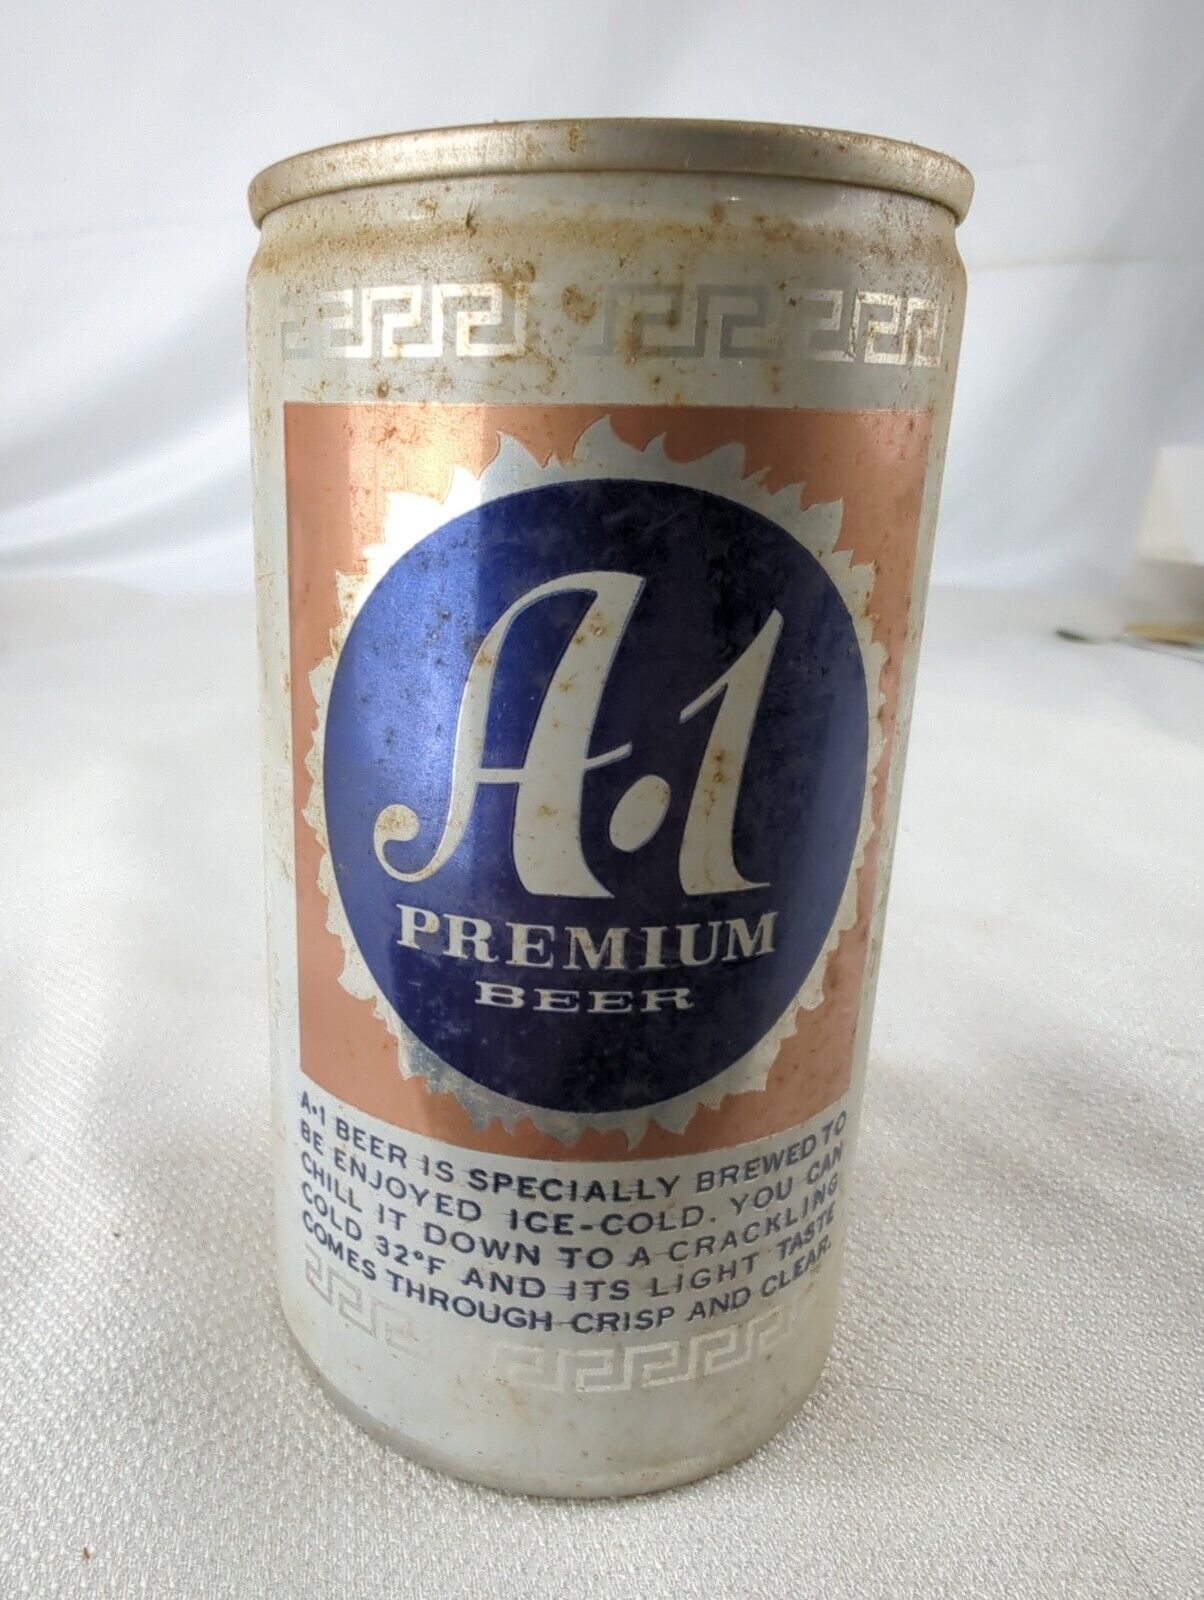 A1 Premium Beer National Brewing Co Baltimore MD Aluminum Pull Tab Can EMPTY